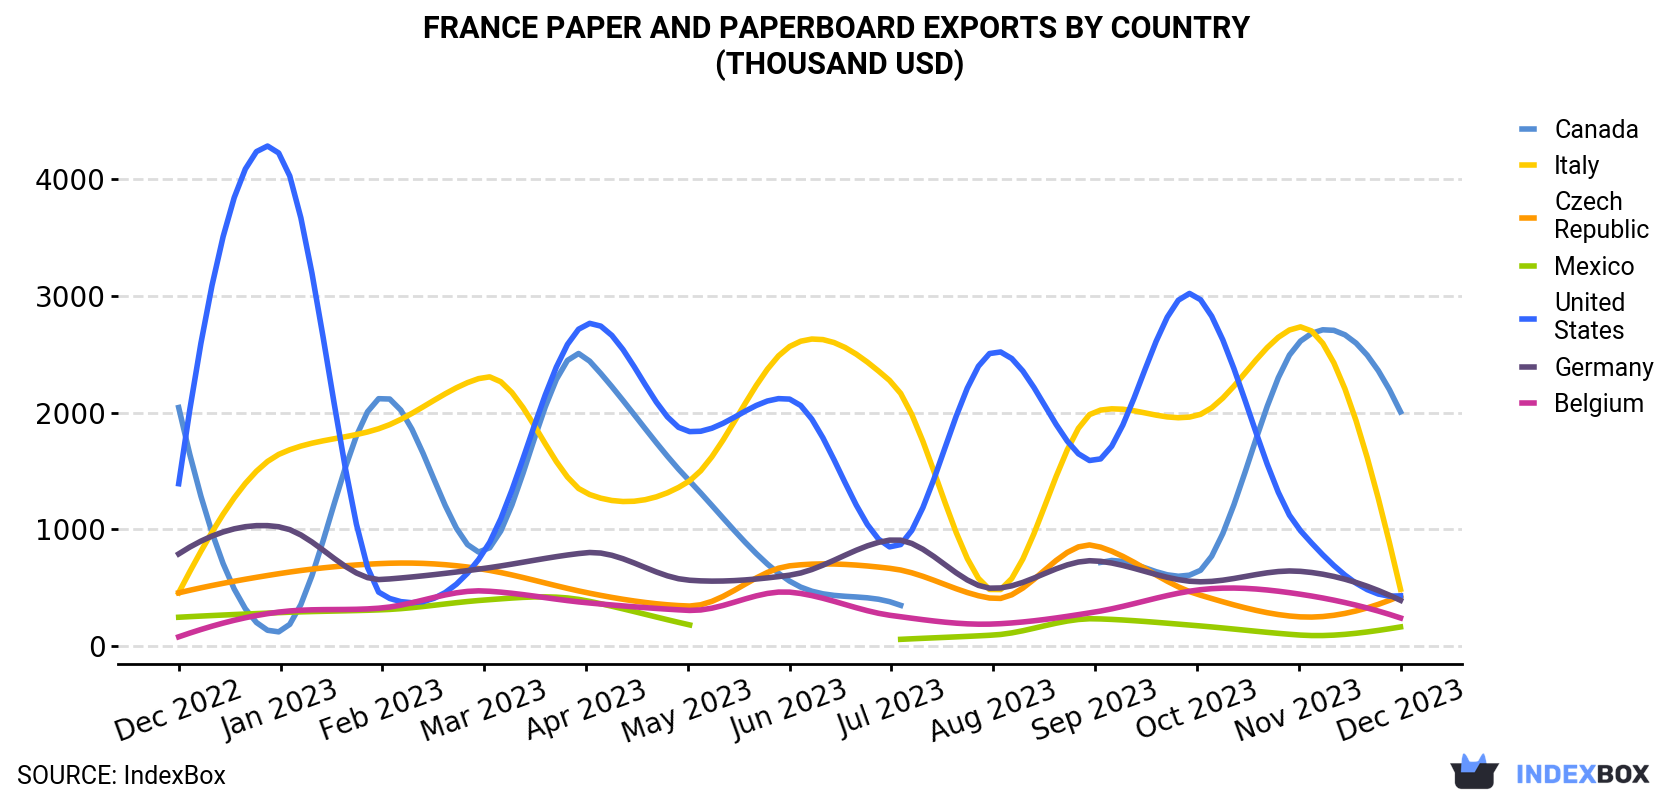 France Paper And Paperboard Exports By Country (Thousand USD)